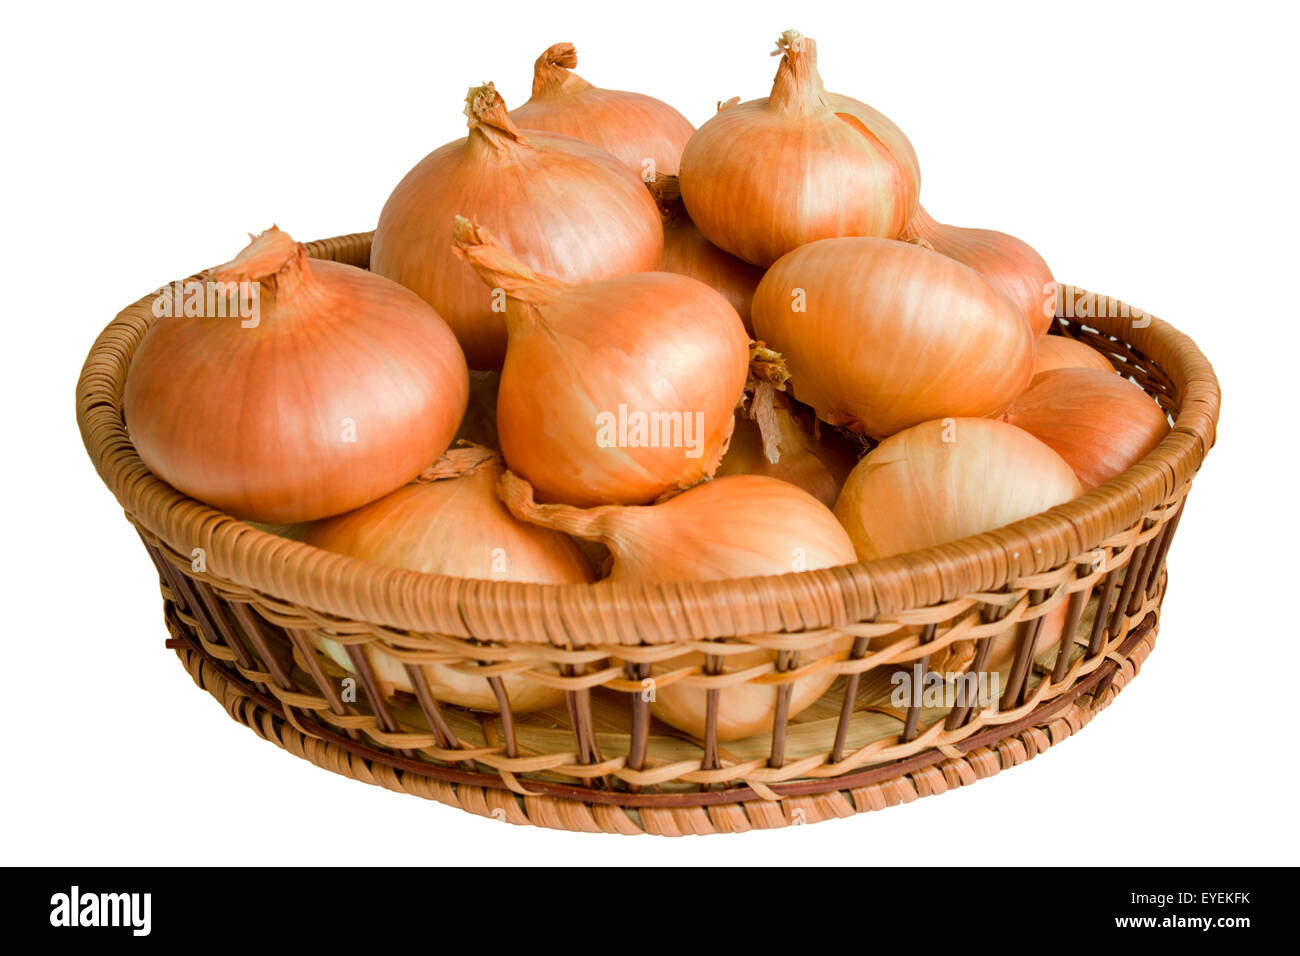 Still life with dried onions, laid out flat in a wicker cradle on white background. Stock Photo